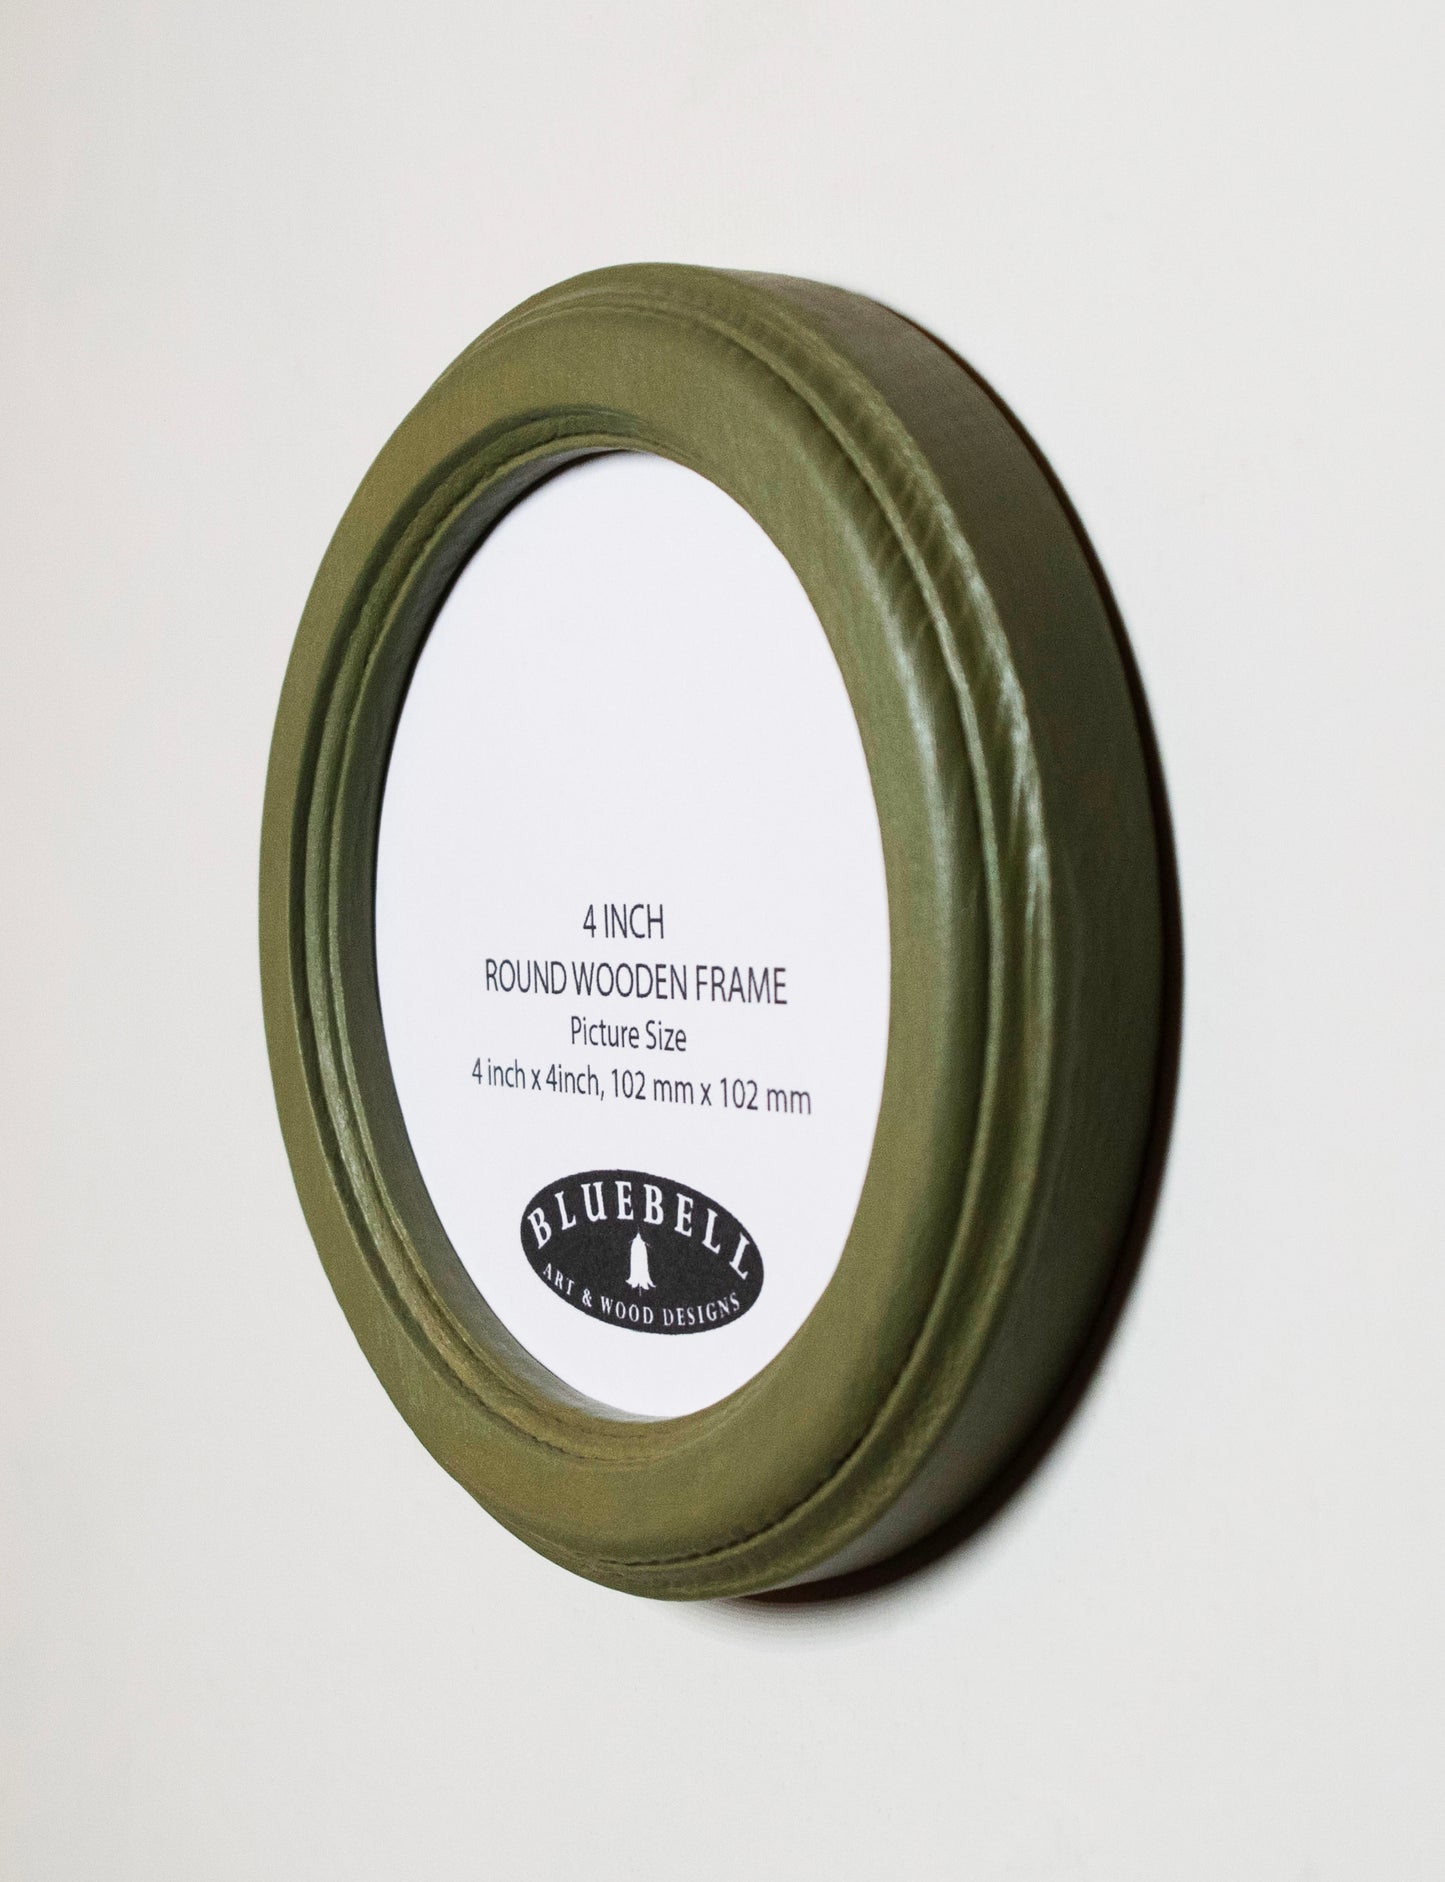 Olive Green 4" x 4" Round Roman Edged Handmade Wooden Photo Picture Frame